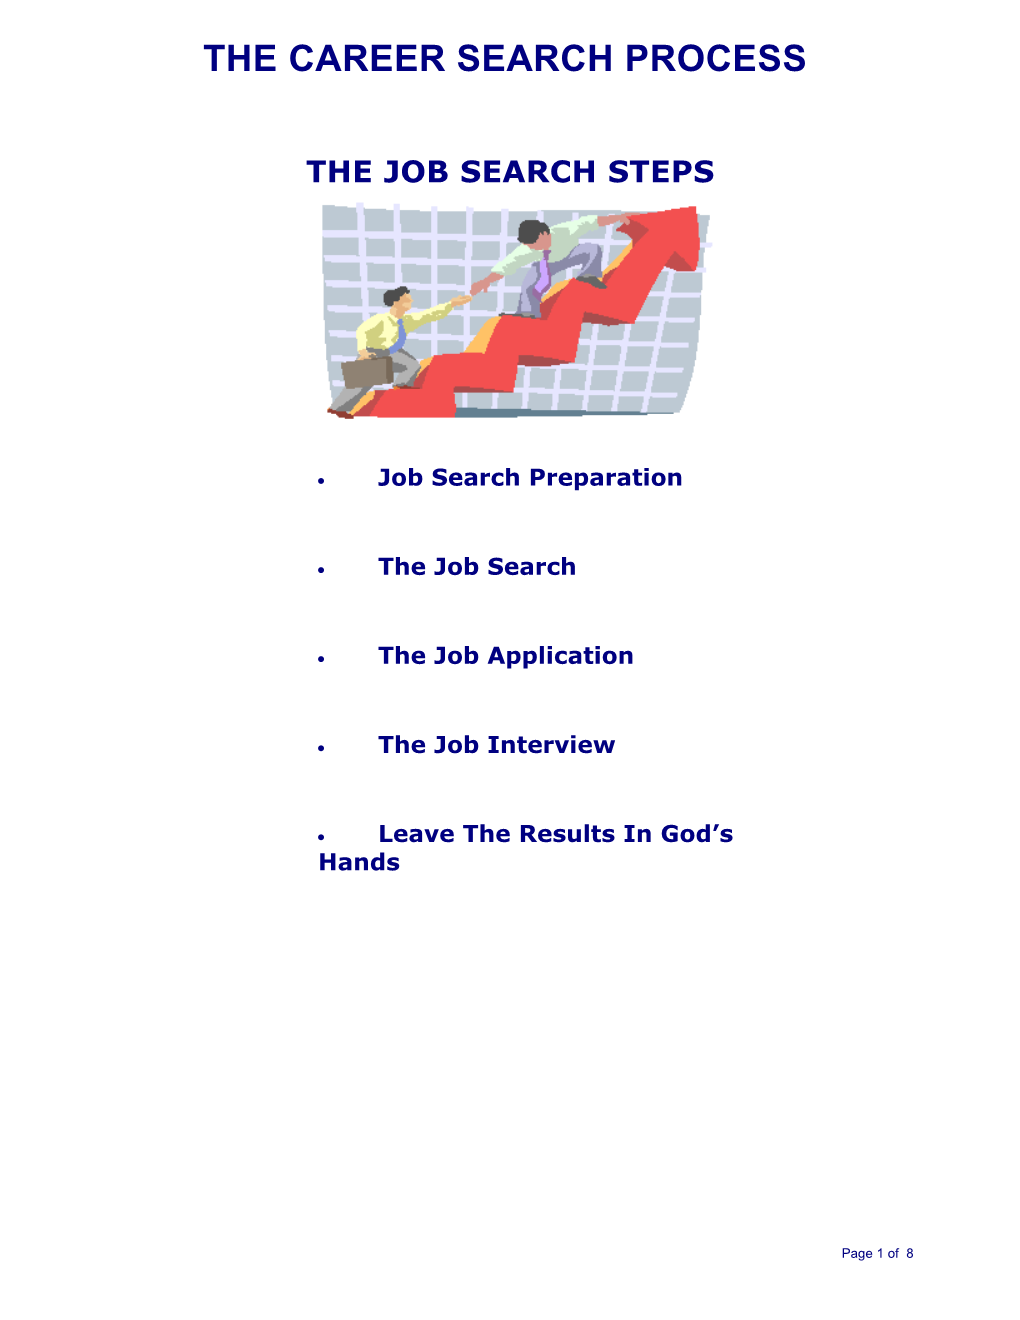 Your Job Search Project